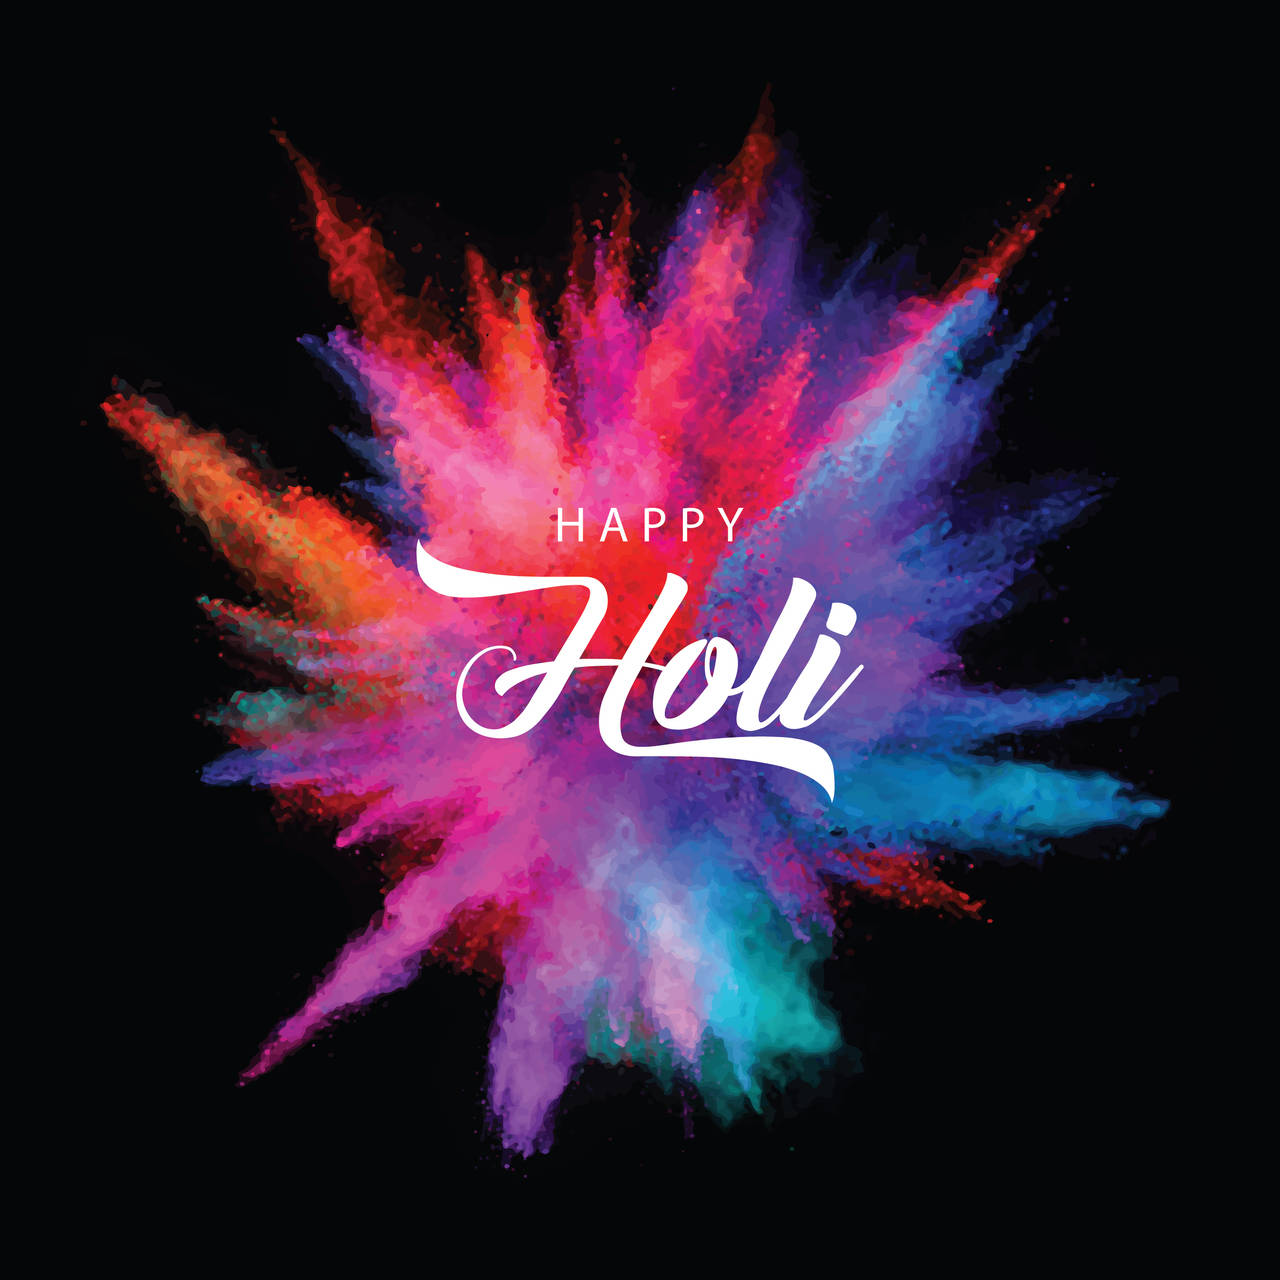 Happy Holi 2020 Memes, Funny Images, Jokes, Wishes, Messages ...